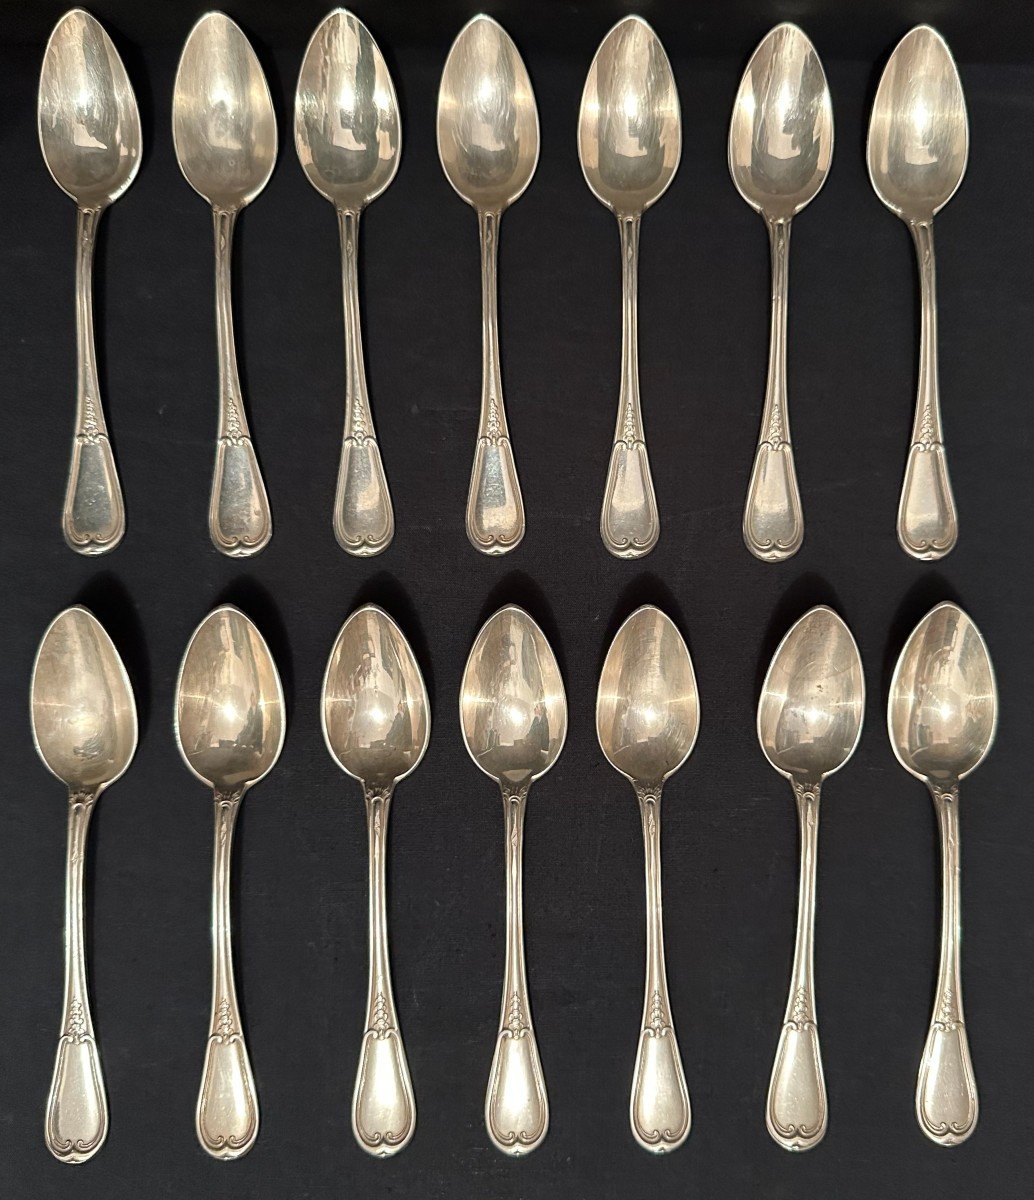 émile Puiforcat 14 Small Spoons Sterling Silver  Flowered Net Model Nineteenth Century